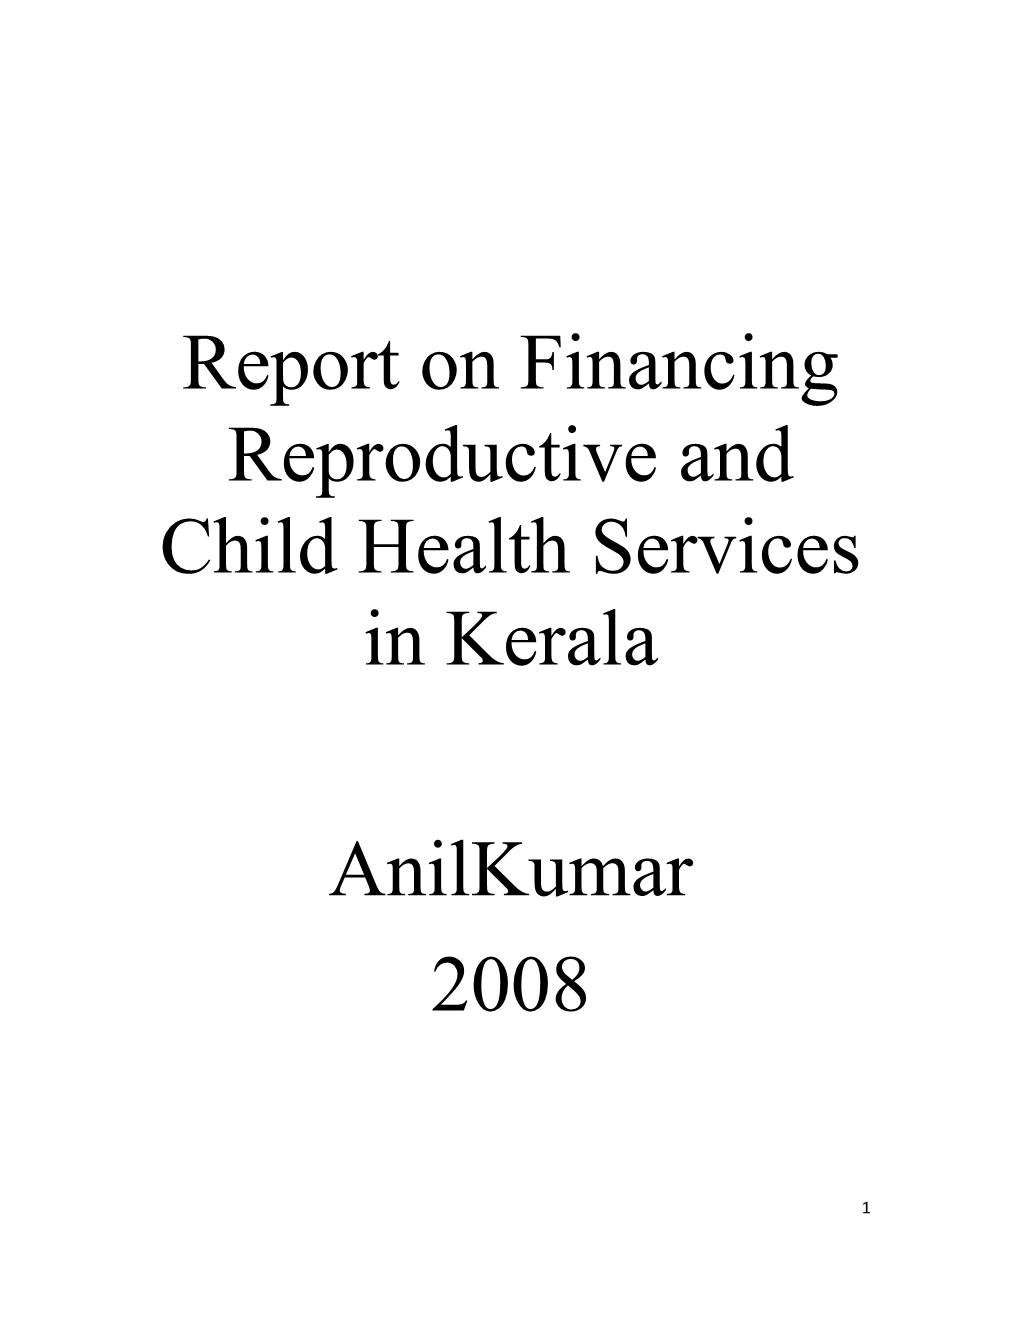 Report on Financing Reproductive and Child Health Services in Kerala